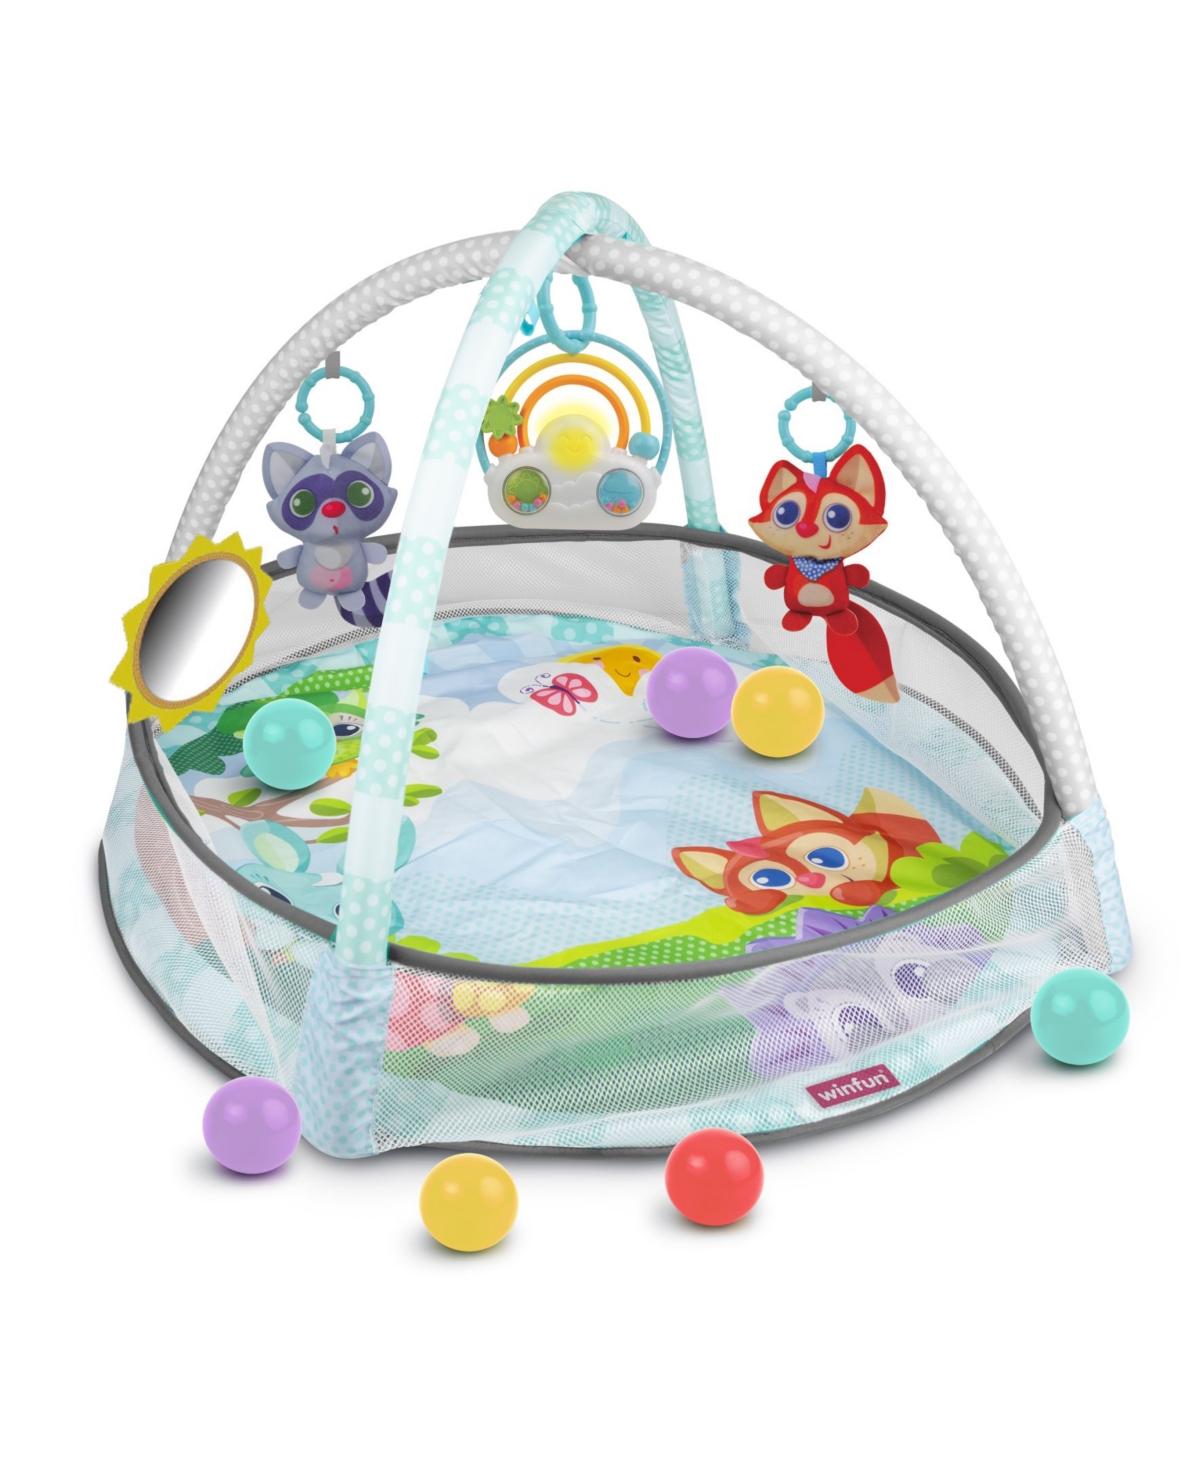 Winfun Babies' Play Space Play Gym With Ball Pit In Multi